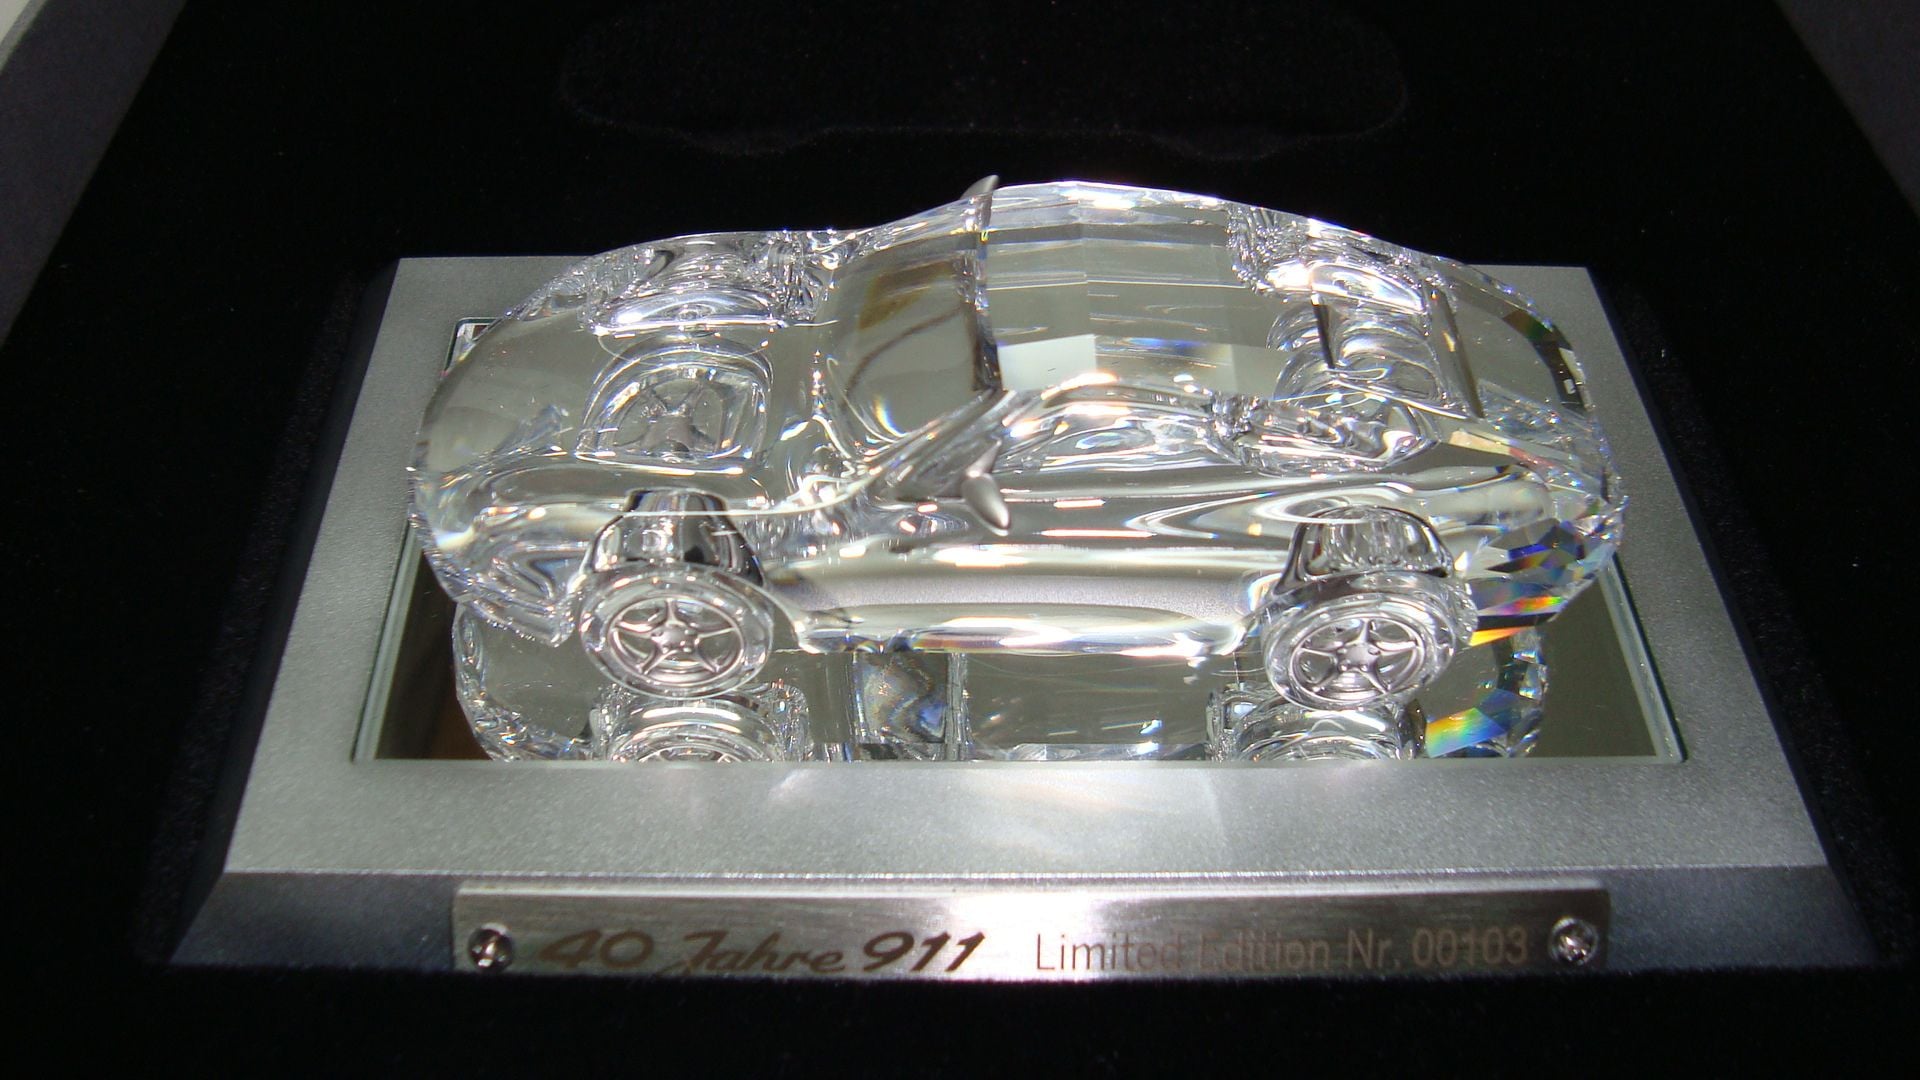 Miscellaneous - FS_Genuine Limited Edition Swarovski Crystal '40 Years of 911', Brand New NLA - New - All Years Porsche 911 - Austin, TX 78701, United States